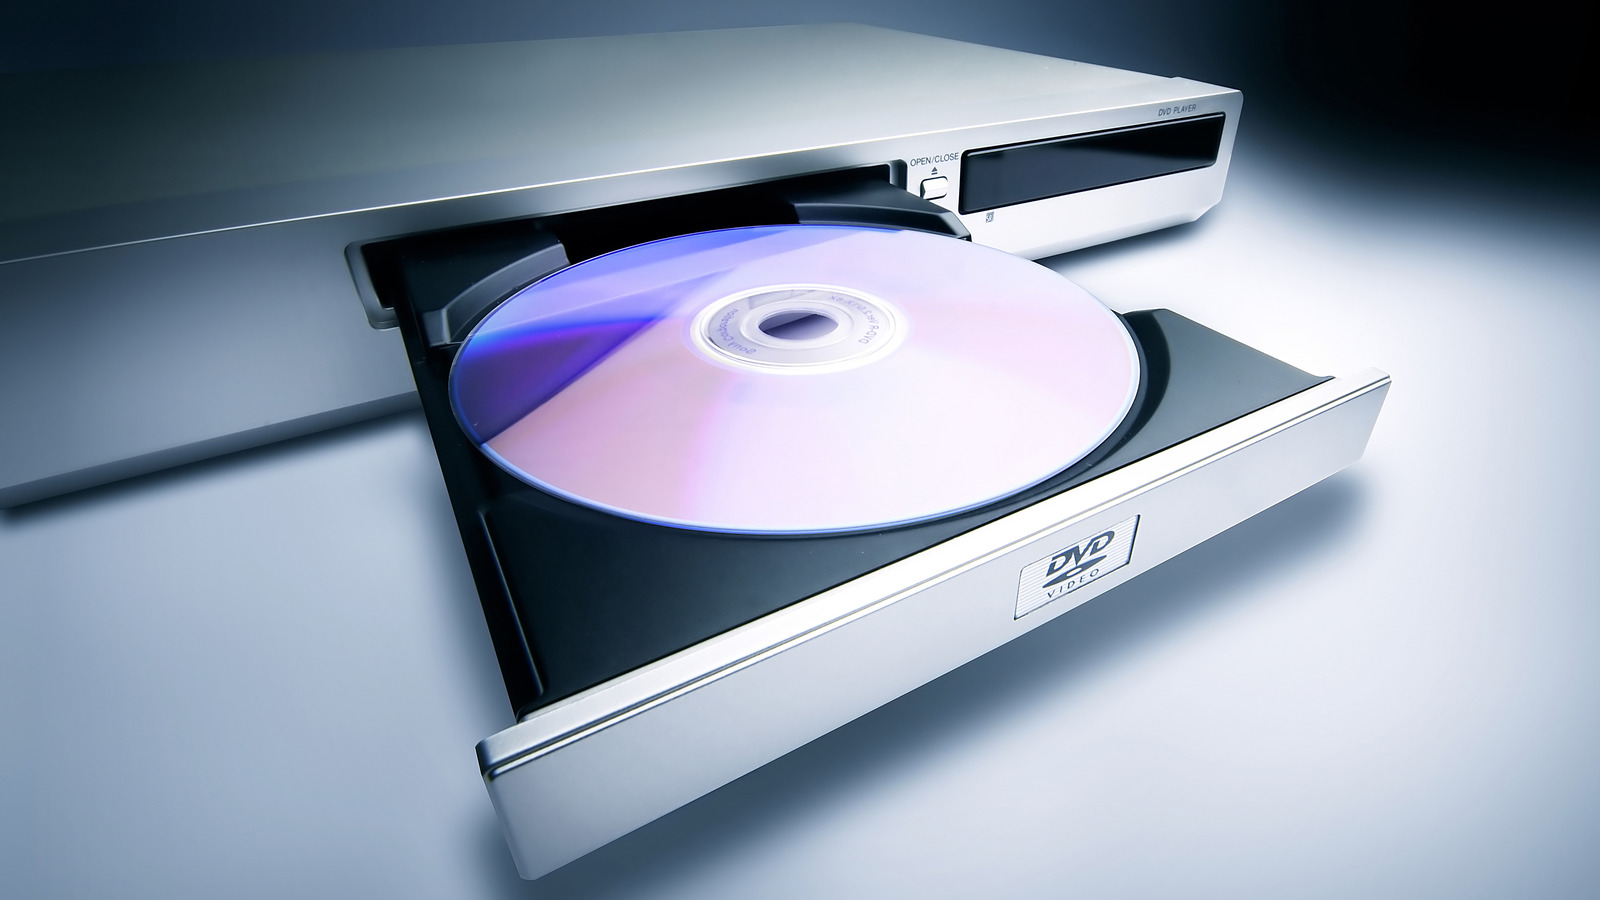 etage Goodwill Imagination The Real Reason HD-DVD Lost The Format Wars